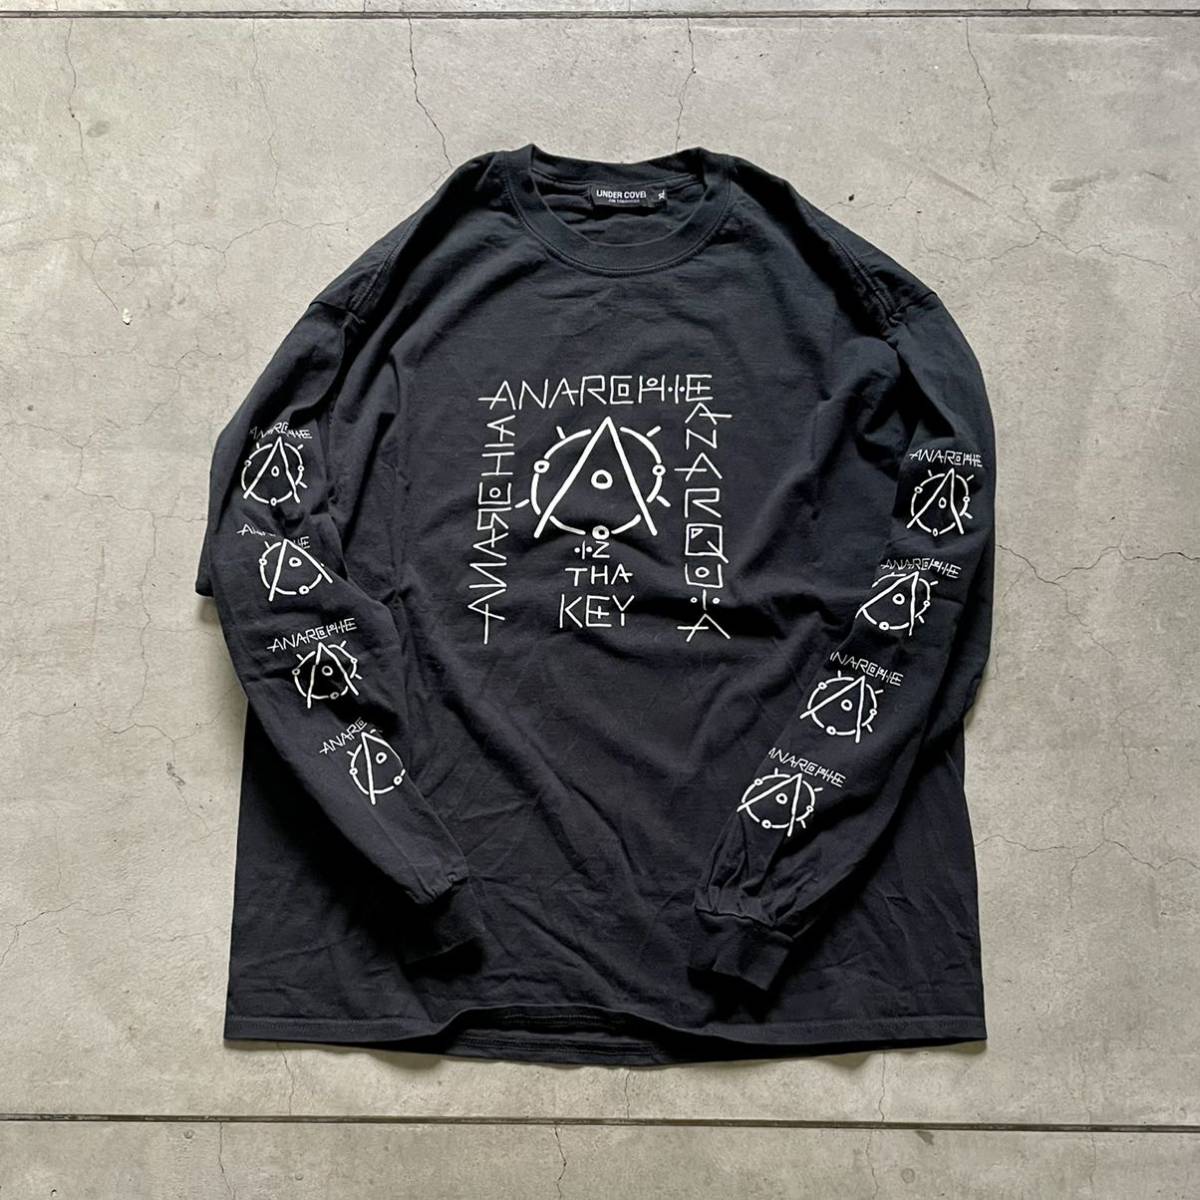 undercover / アンダーカバー / T-shirt XL ロングスリーブ ロンT Tシャツ MAD MARKET ブラック  検)アンダーカバイズム undercoverism product details | Proxy bidding and ordering  service for auctions and shopping within Japan and the United States -